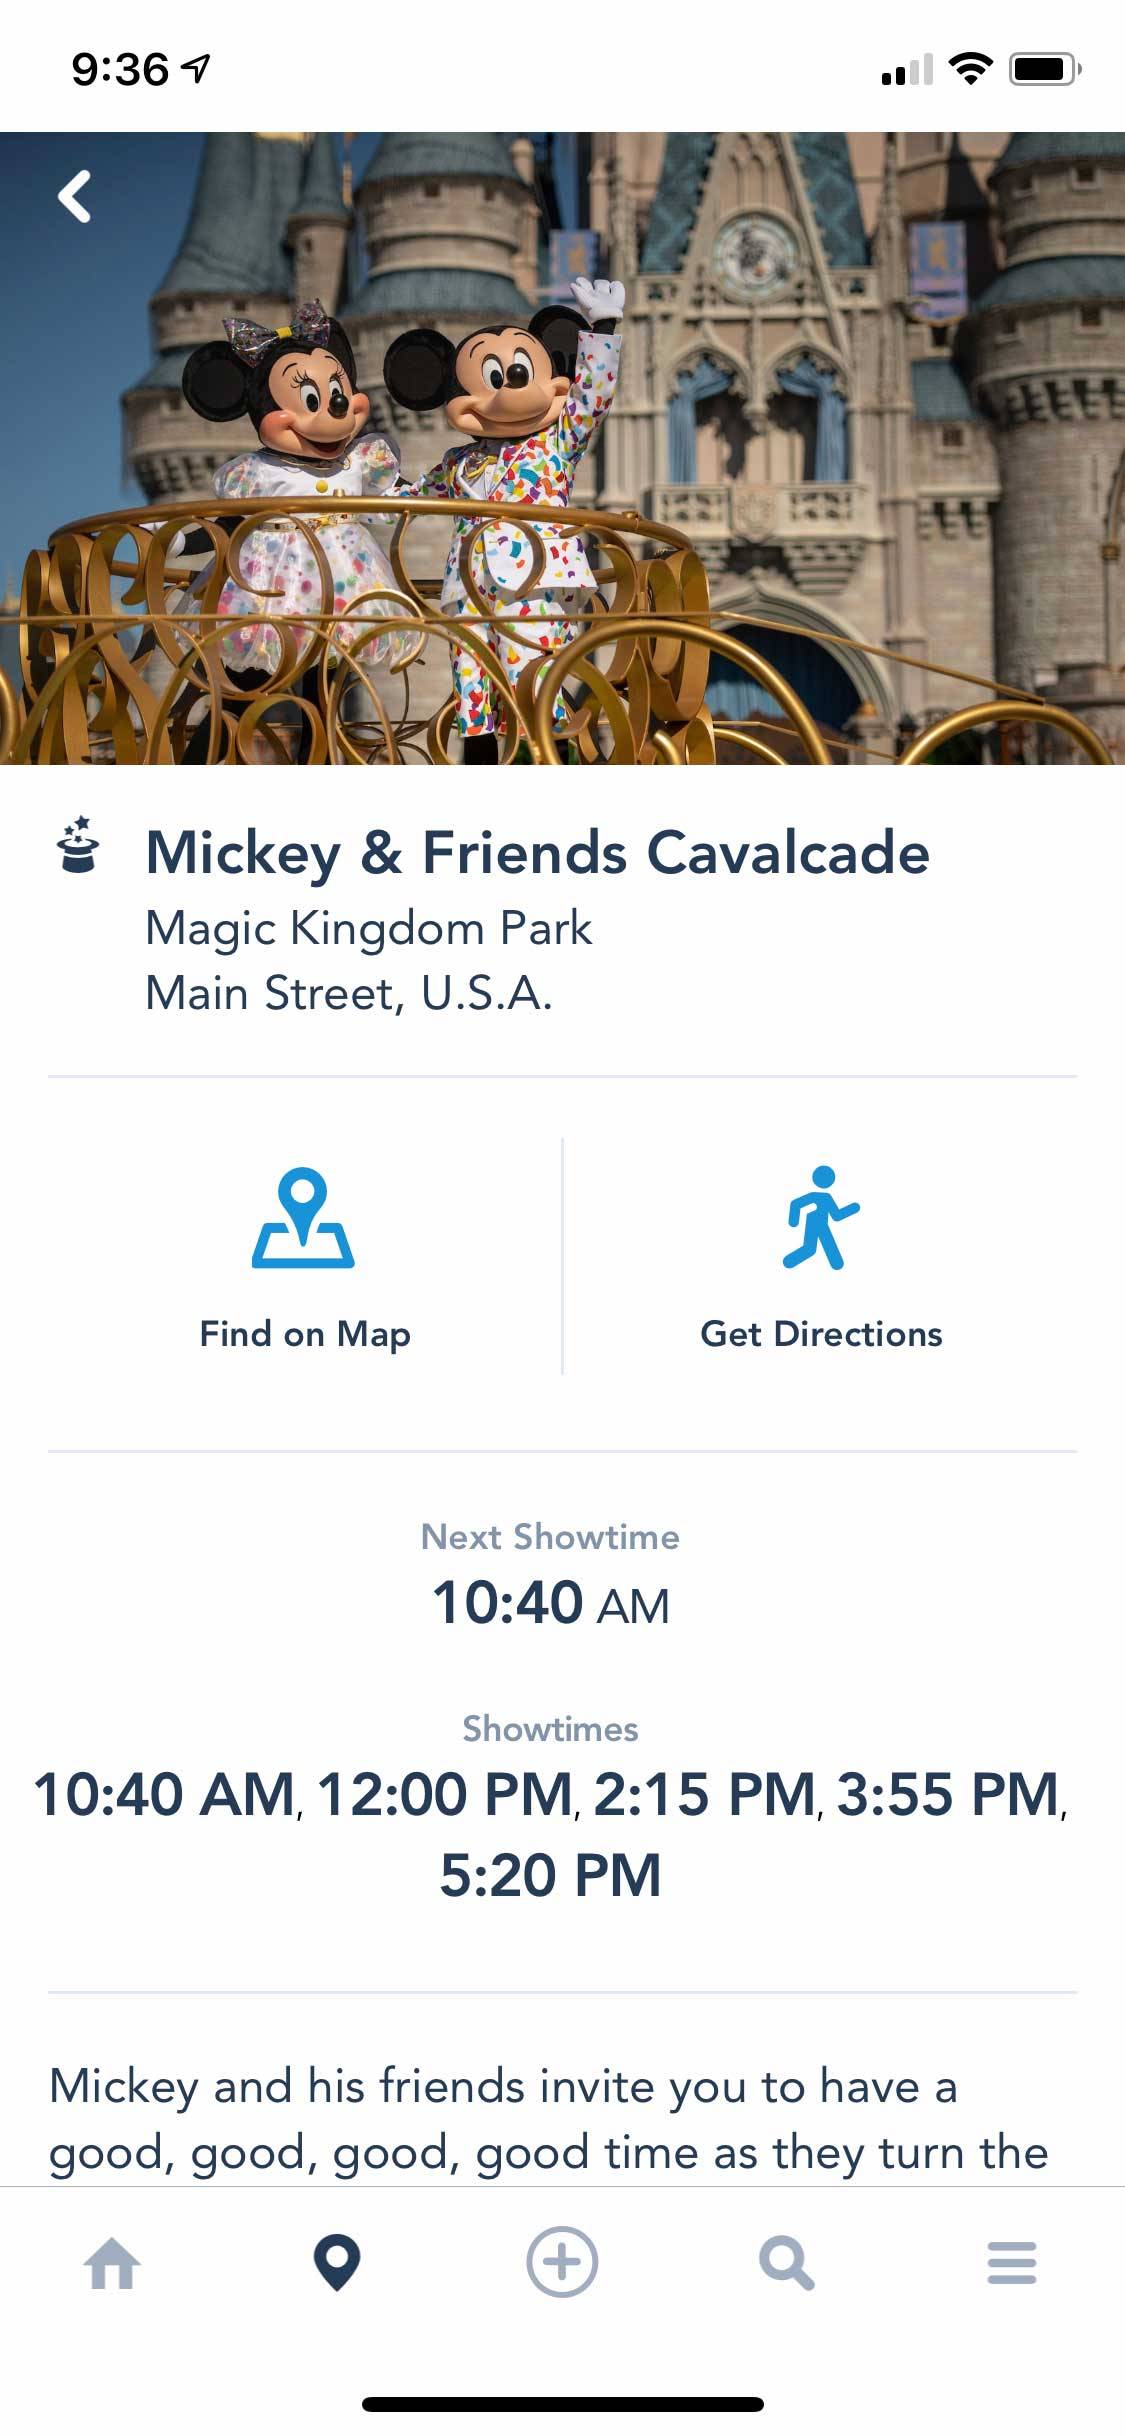 Screenshot from My Disney Experience - Mickey and Friends cavalcade showtimes